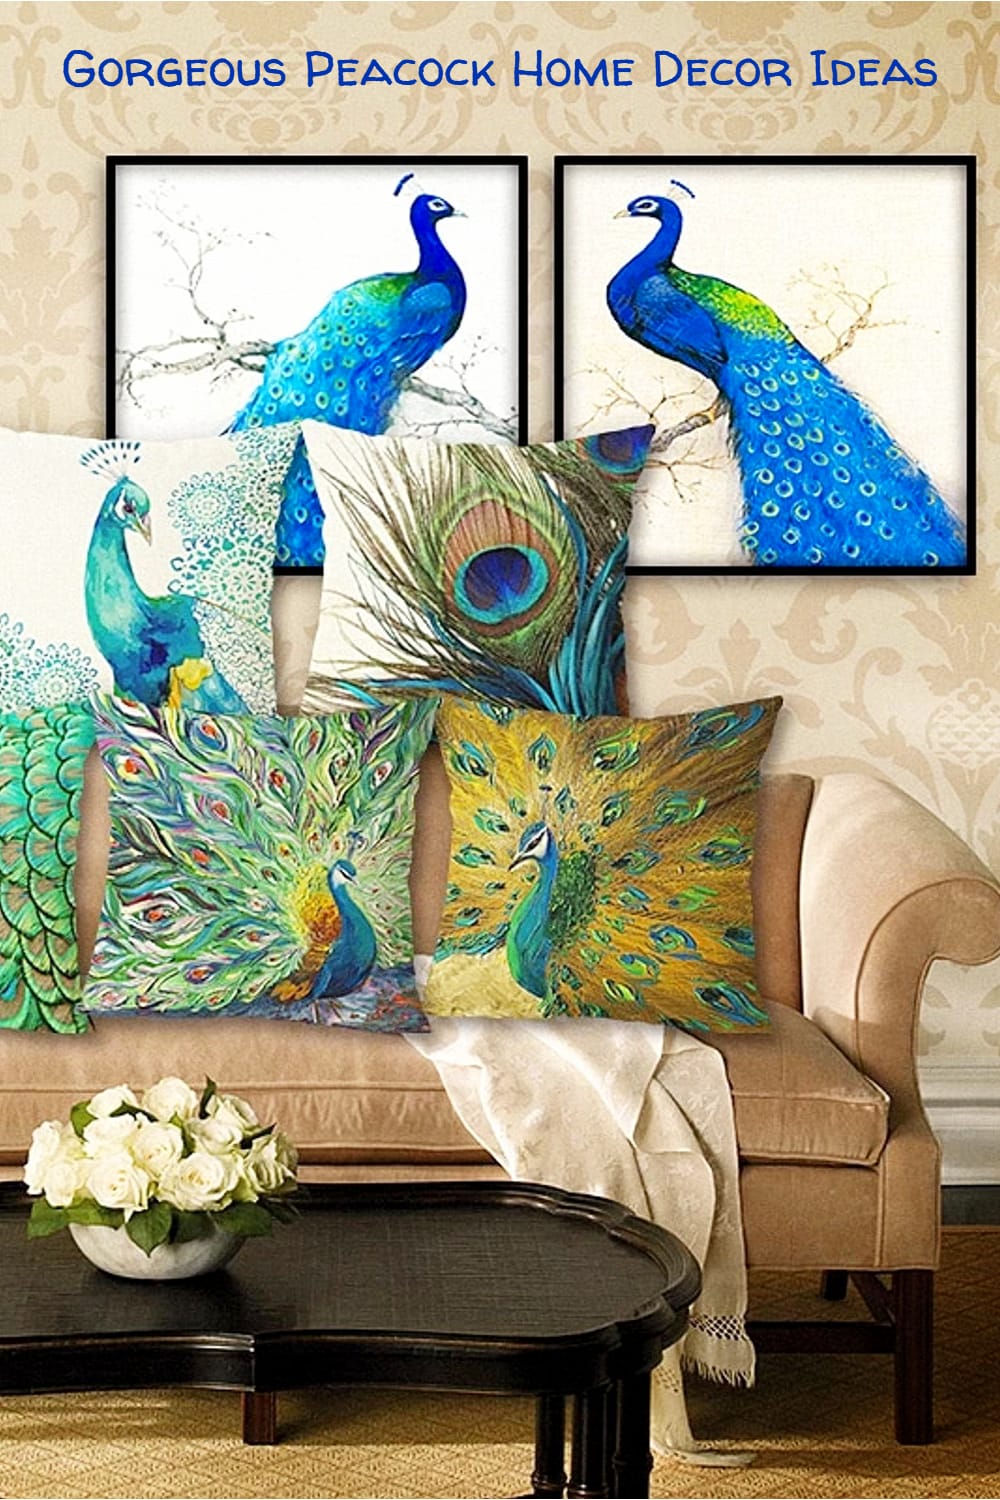 Peacock Decor ideas with Peacock throw pillows, teal blue, turquoise & purple colored pillows, embroidered peacock pillows and more decorative peacock pillows with a peacock design - velvet, silk and feather peacock pillows and pillow covers too that you can find at Target, Pier One, Amazon, Walmart etc to go with peacock rugs and your peacock decorations at home. Fun peacock blue home accessories!